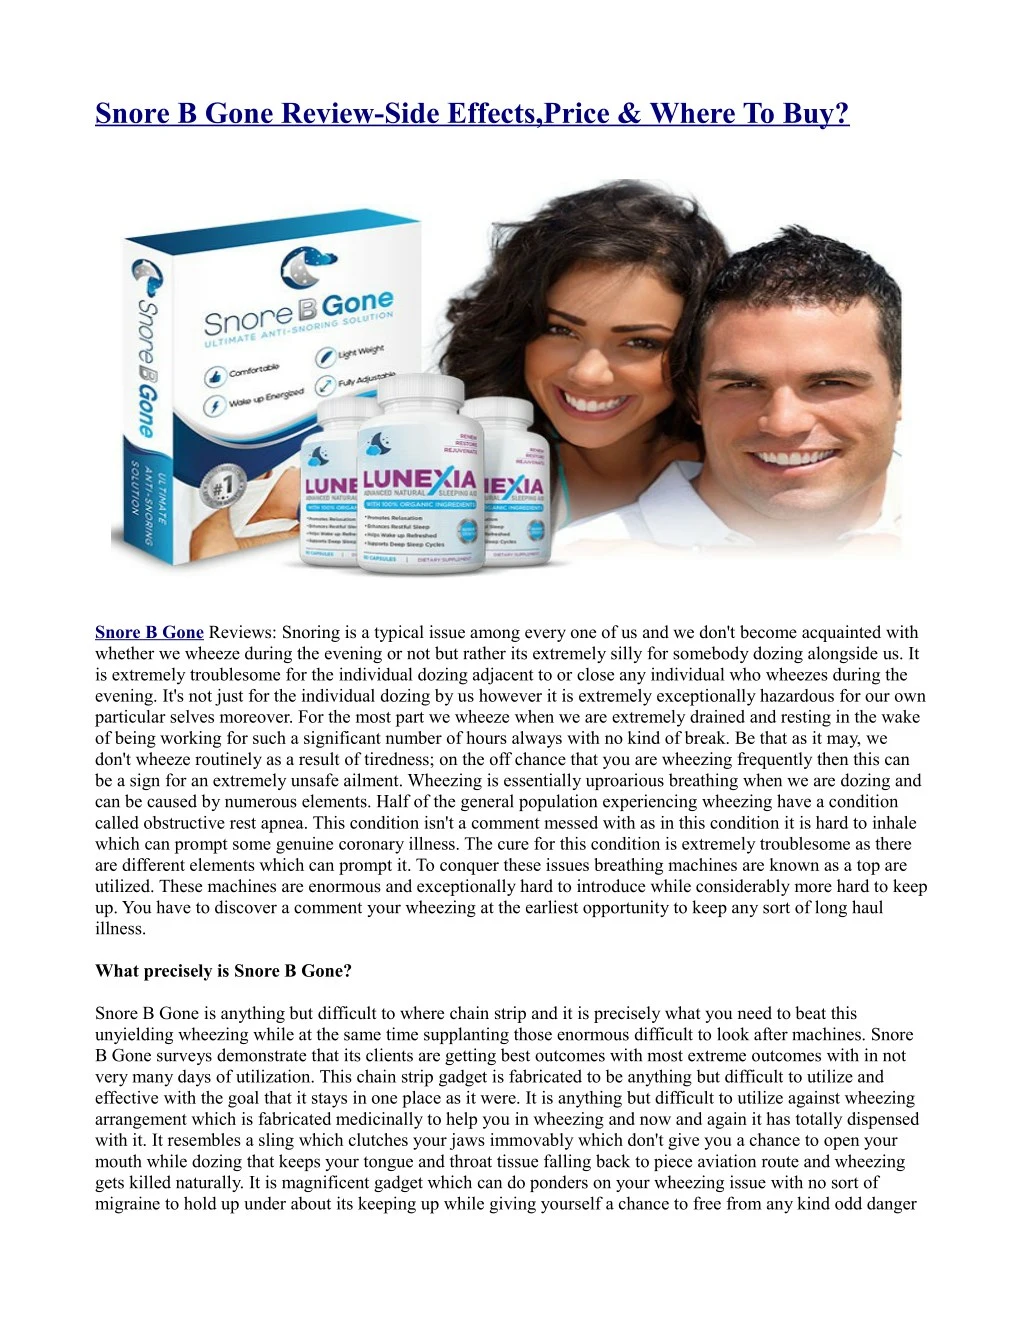 snore b gone review side effects price where